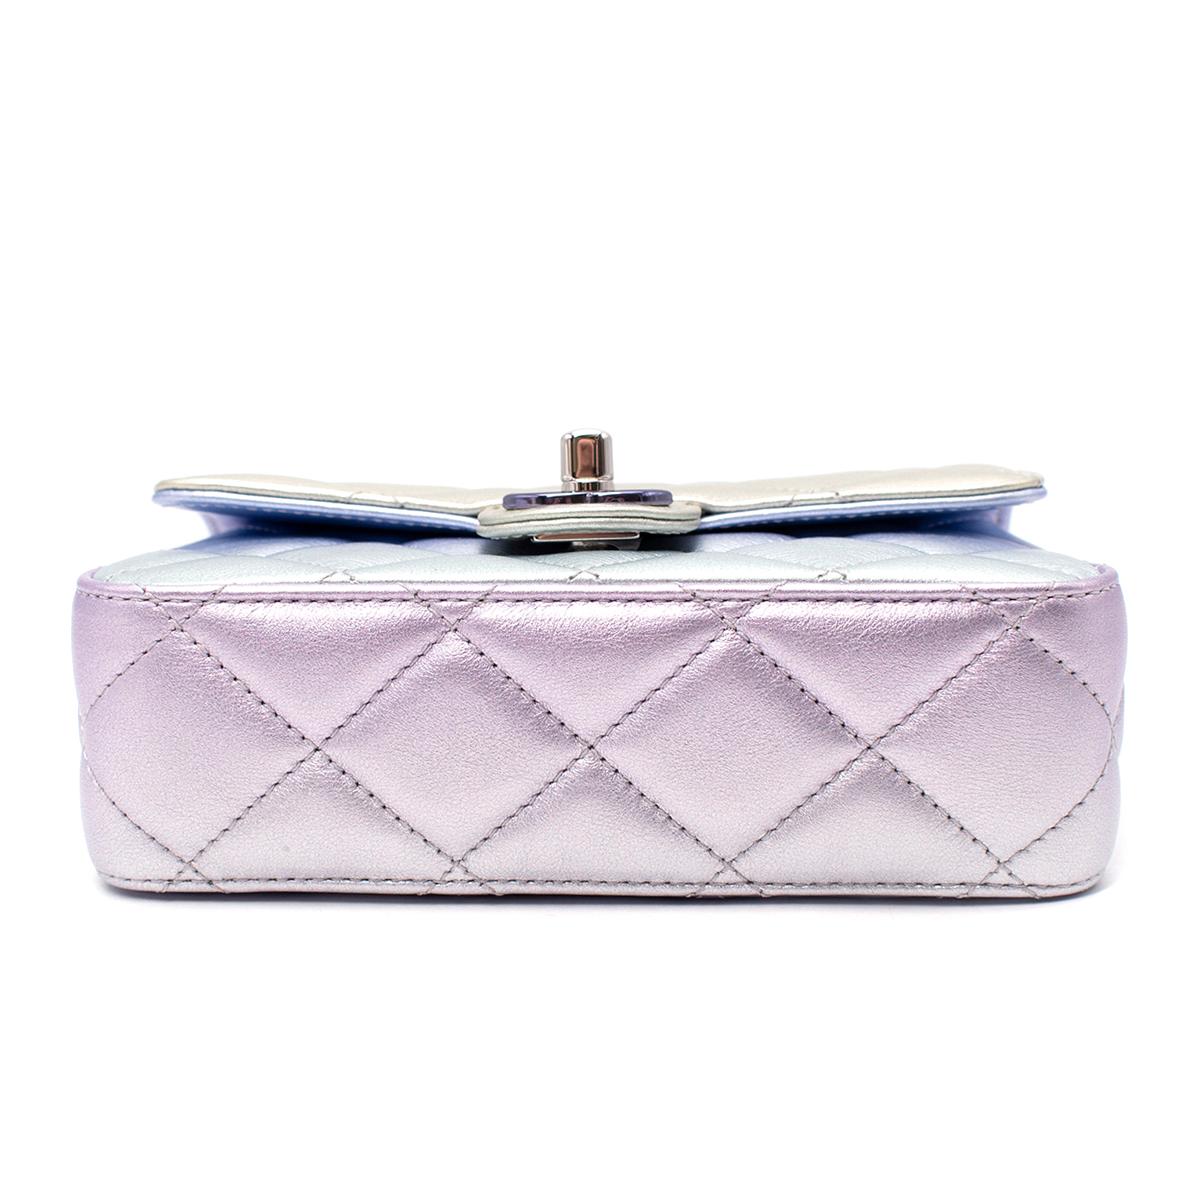 Chanel Lilac Iridescent Metallic Diamond Quilted Leather Minaudiere For Sale 1